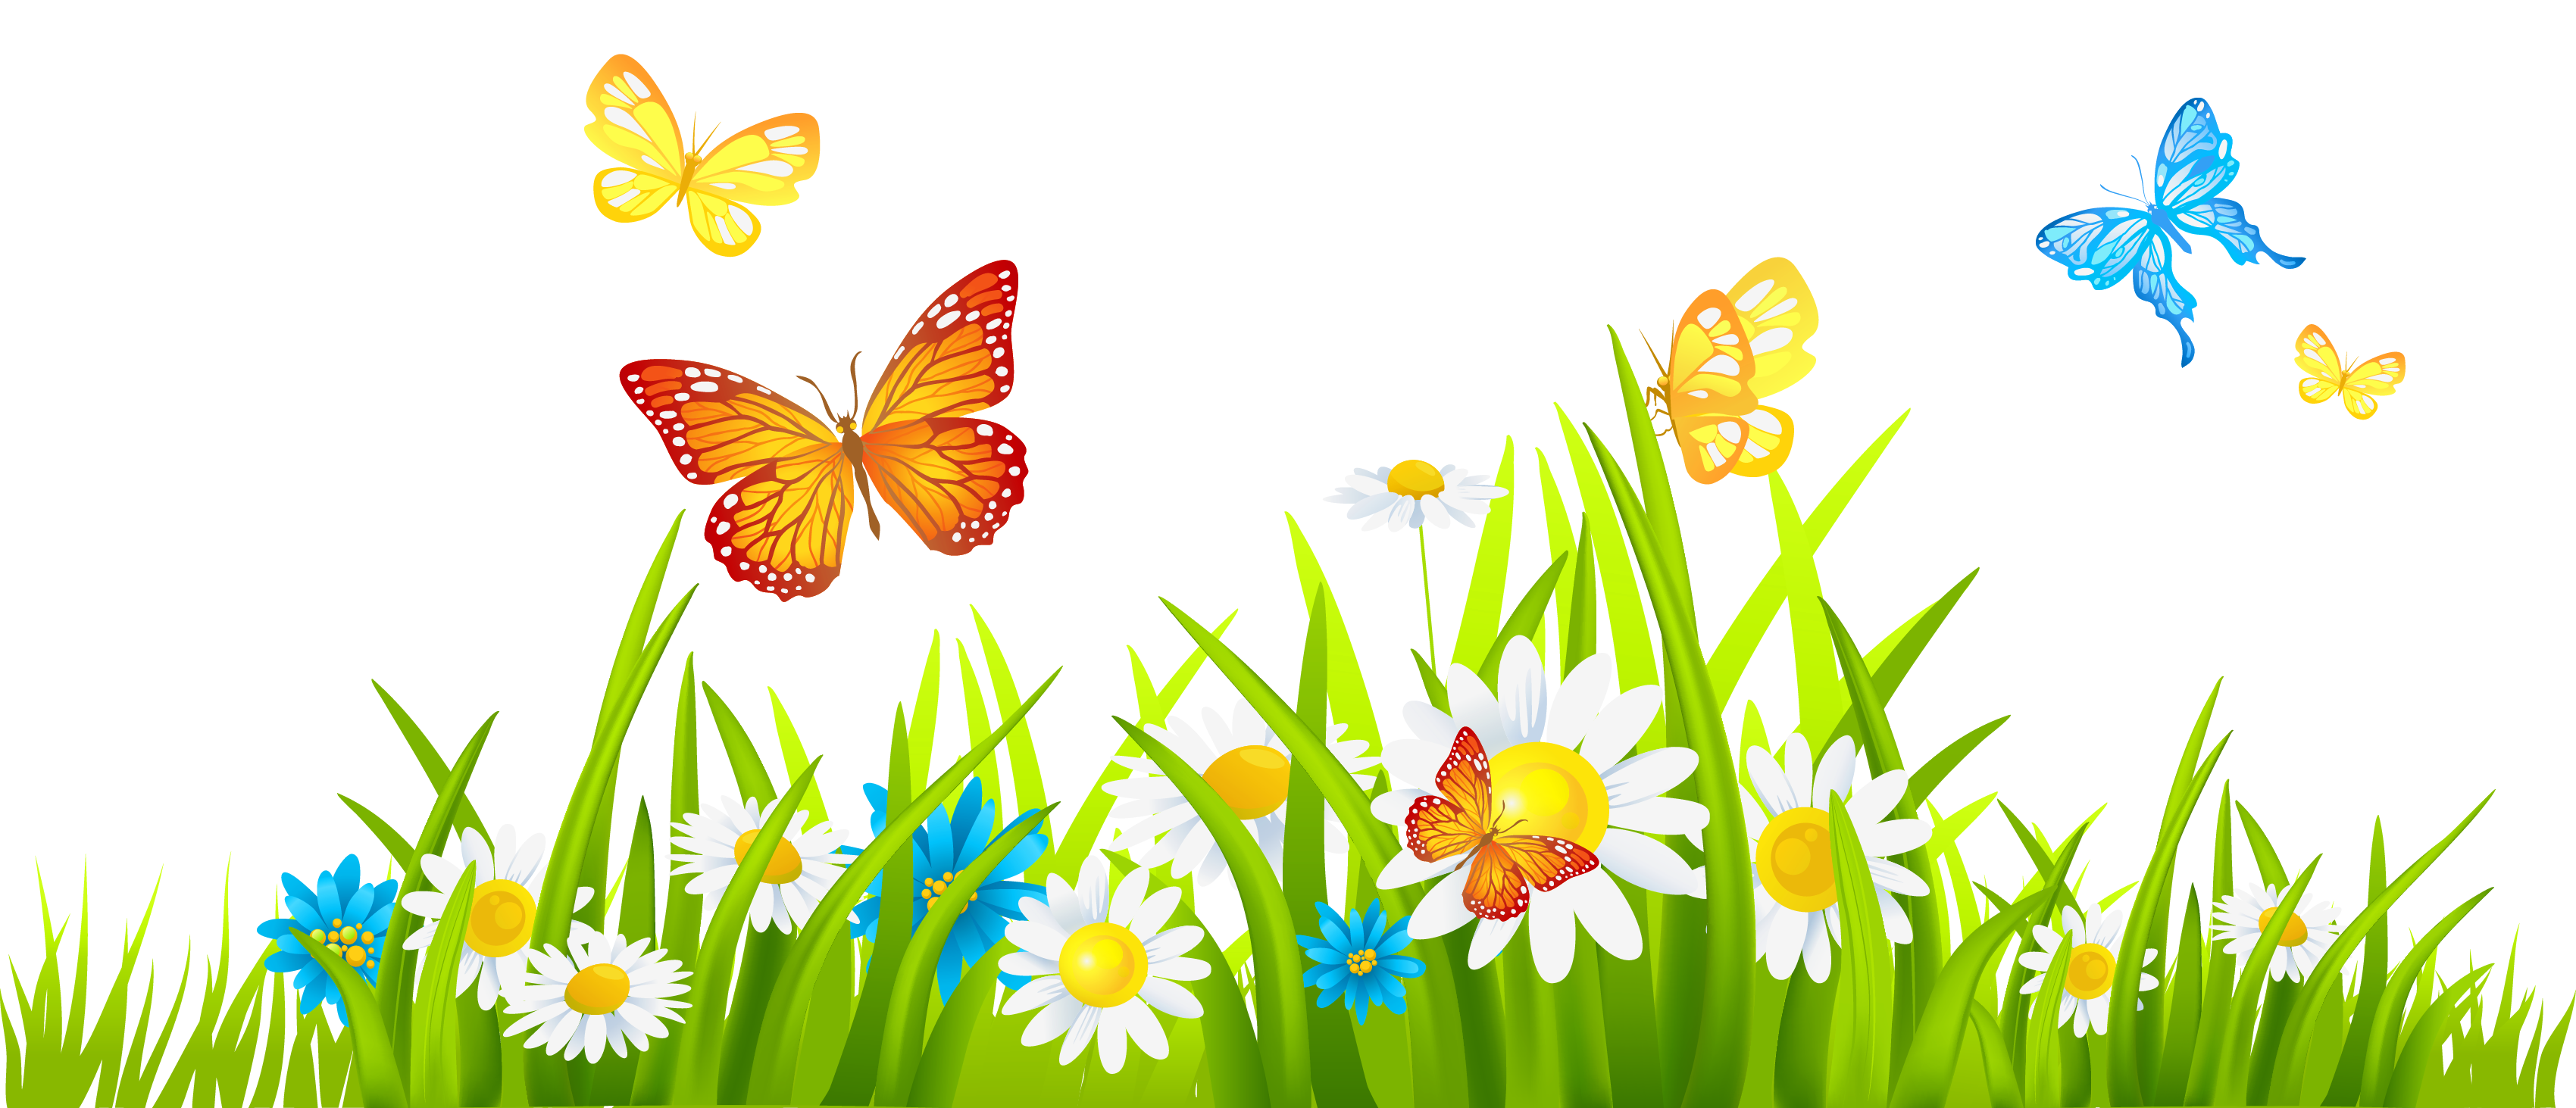 Png Hd Of Butterflies And Flowers - Grass Ground With Flowers And Butterflies Png Clipart, Transparent background PNG HD thumbnail